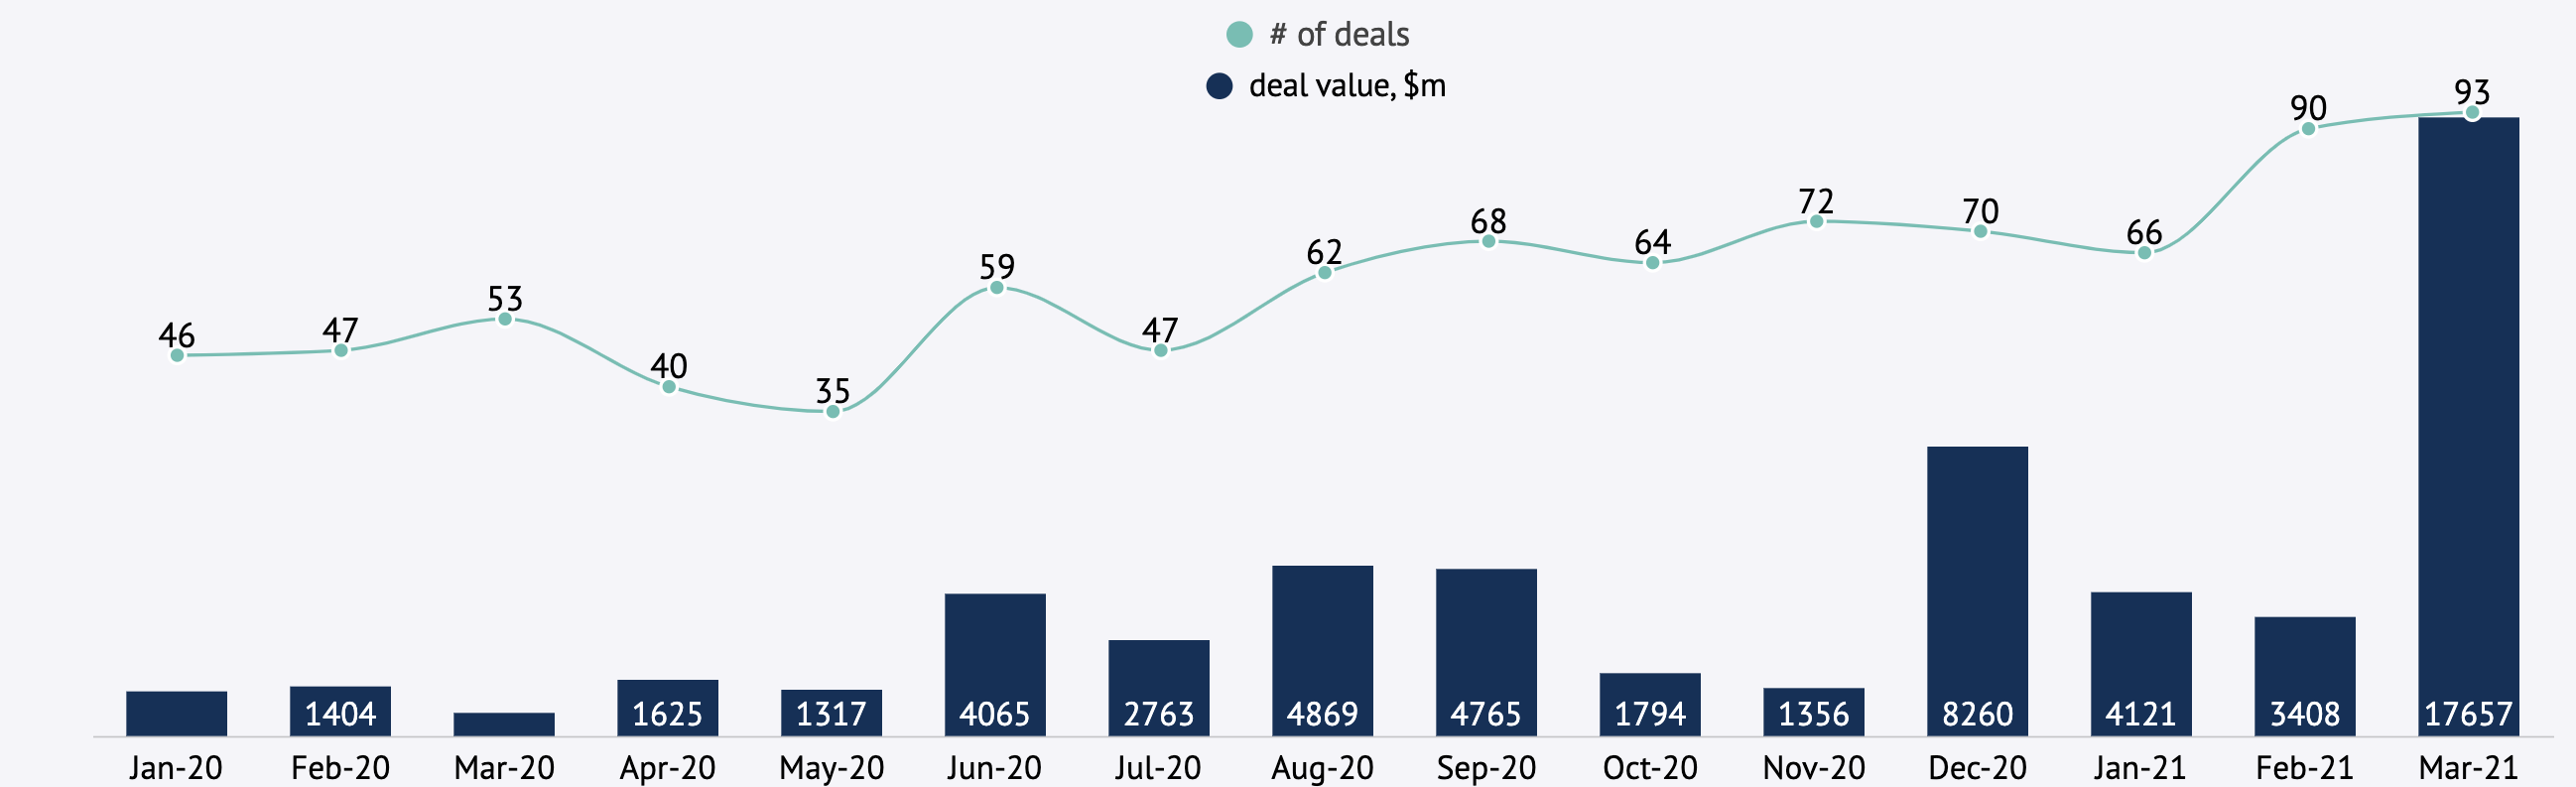 InvestGame's Tracker of M&A deals